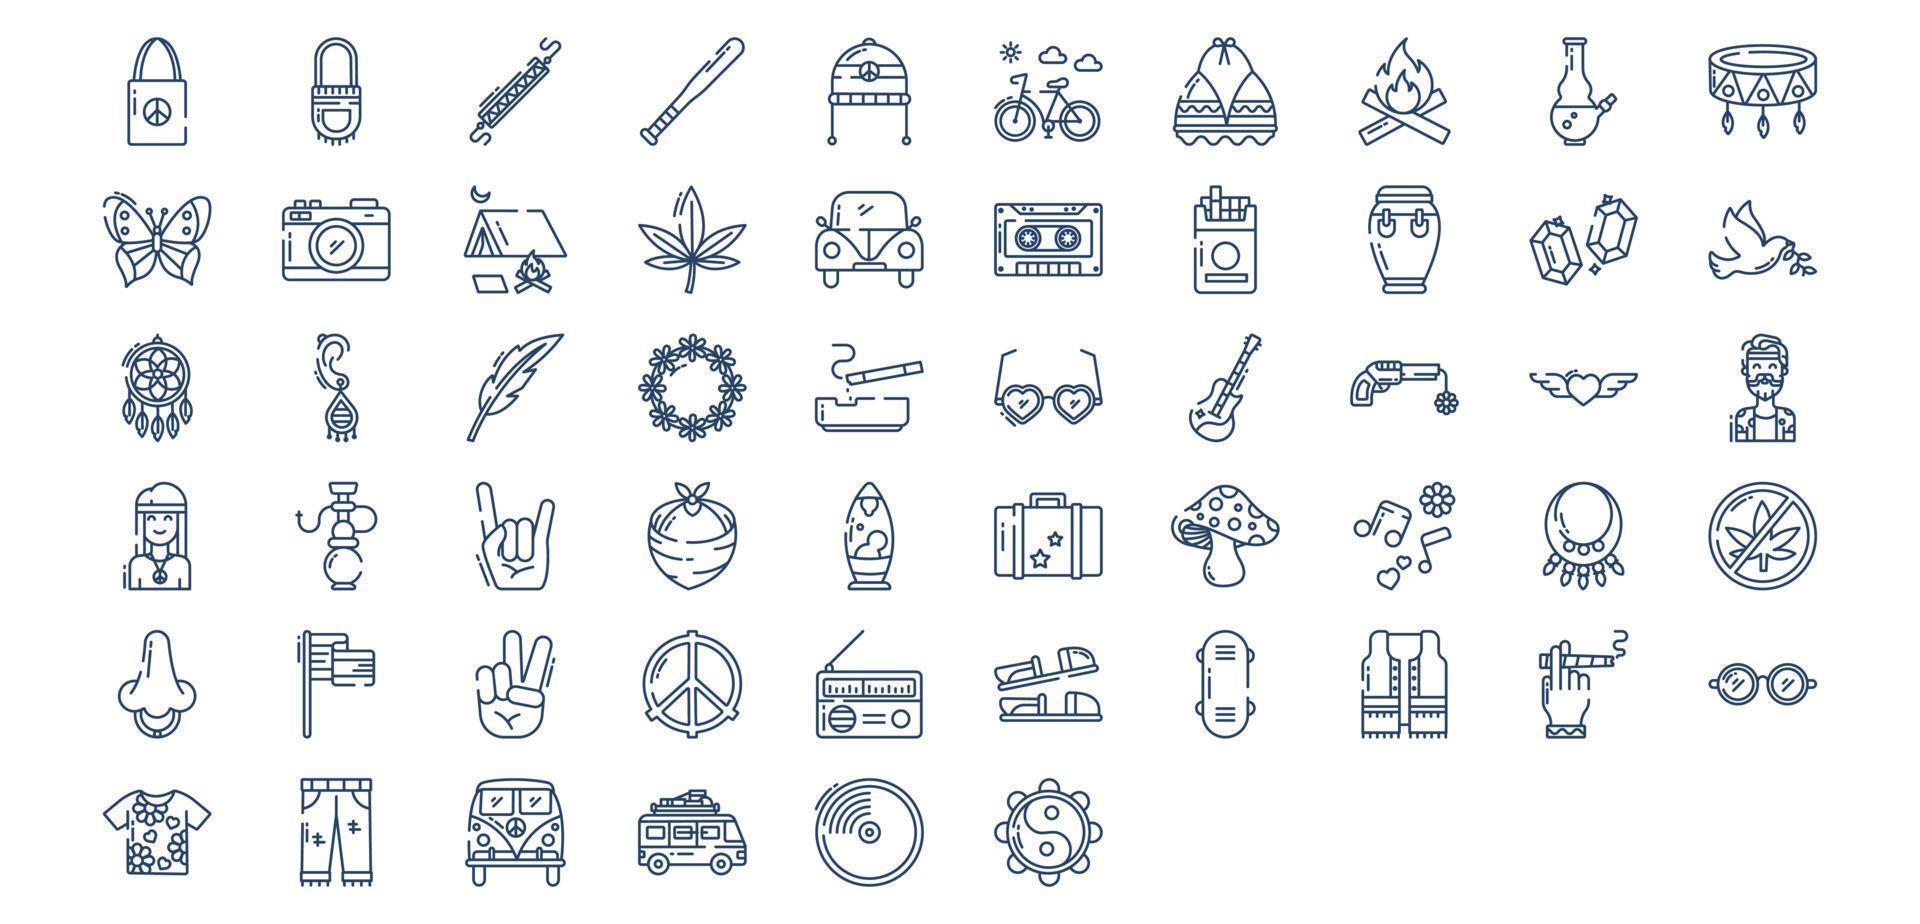 Collection of icons related to Hippie, including icons like Bag, Baseball, Peace, Bicycle, Bikini and more. vector illustrations, Pixel Perfect set